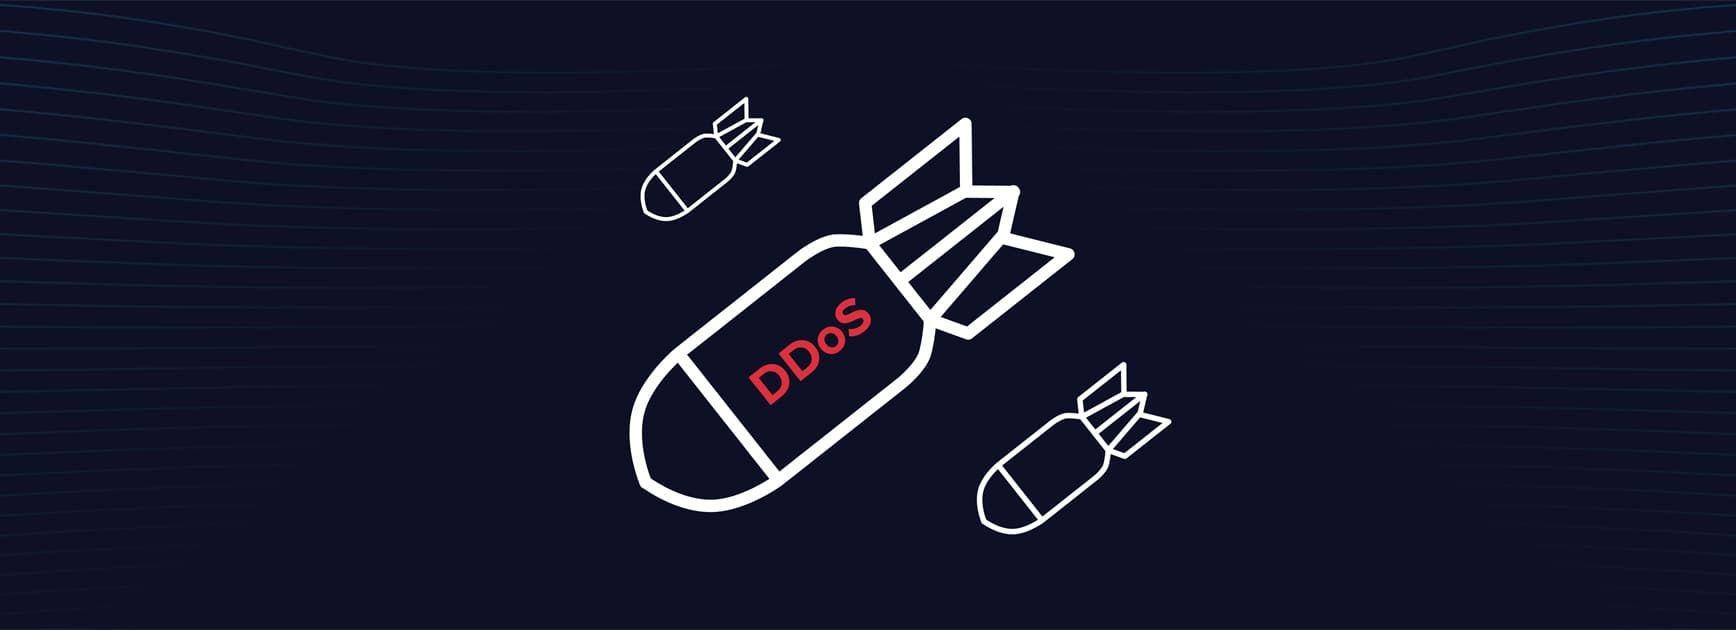 DDOS attack - what is it and how to protect yourself